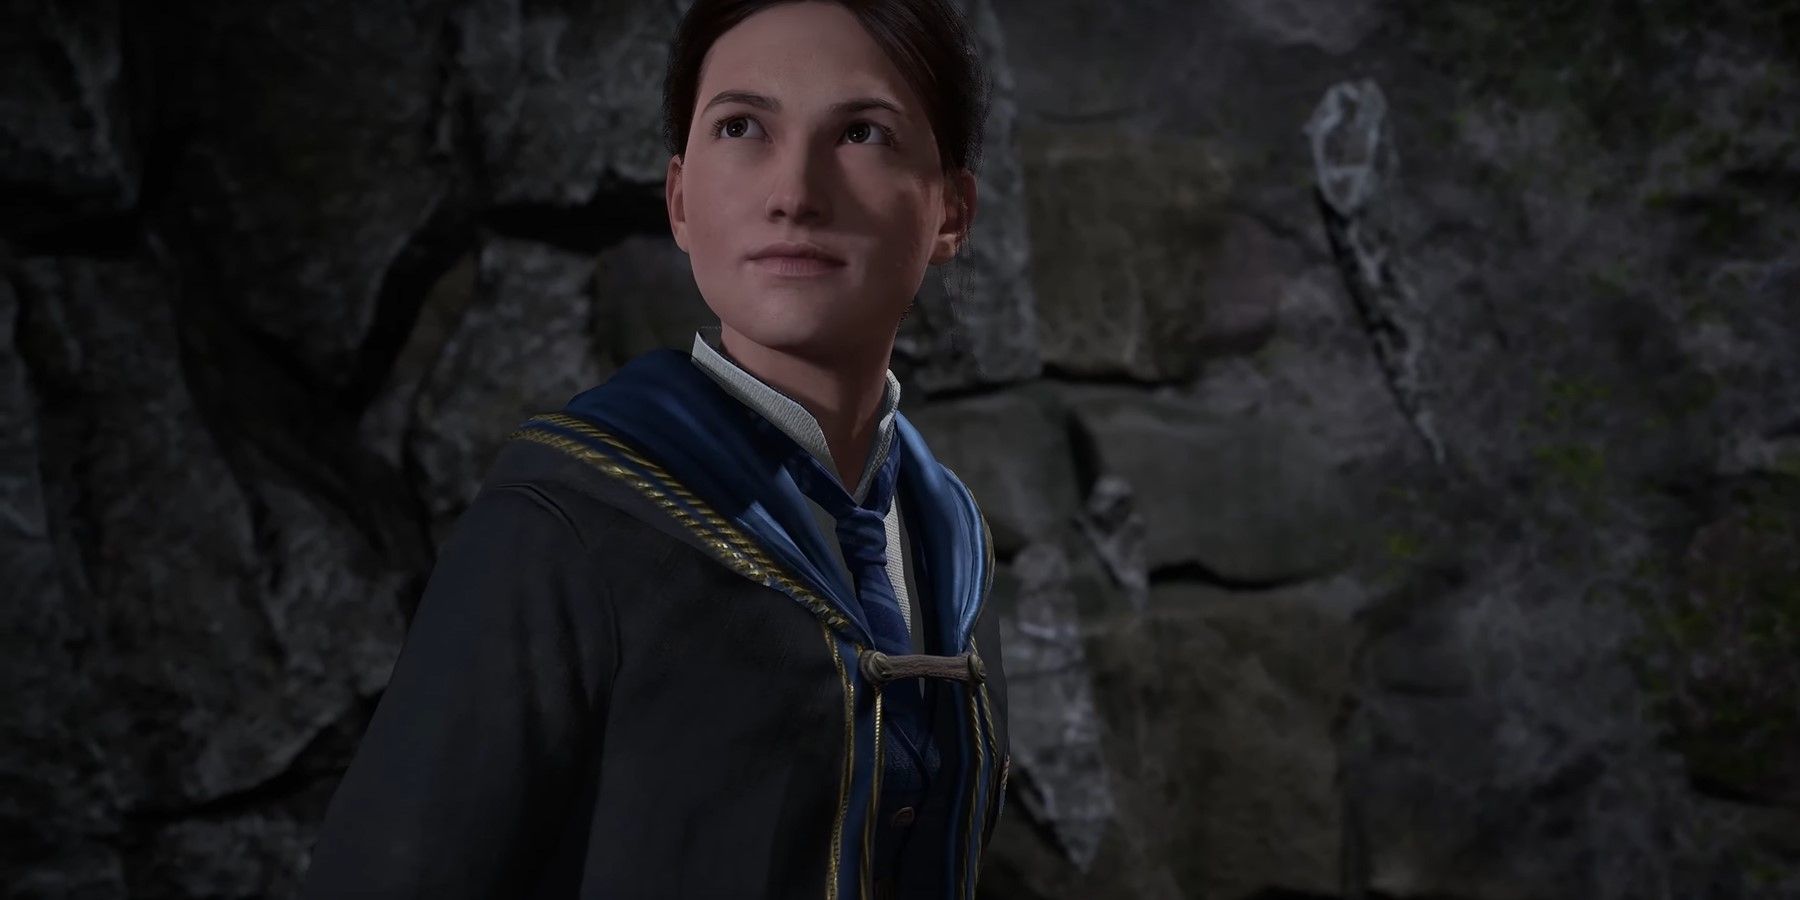 Hogwarts Legacy's journey to PS4 and Xbox One delayed again; check new  date!